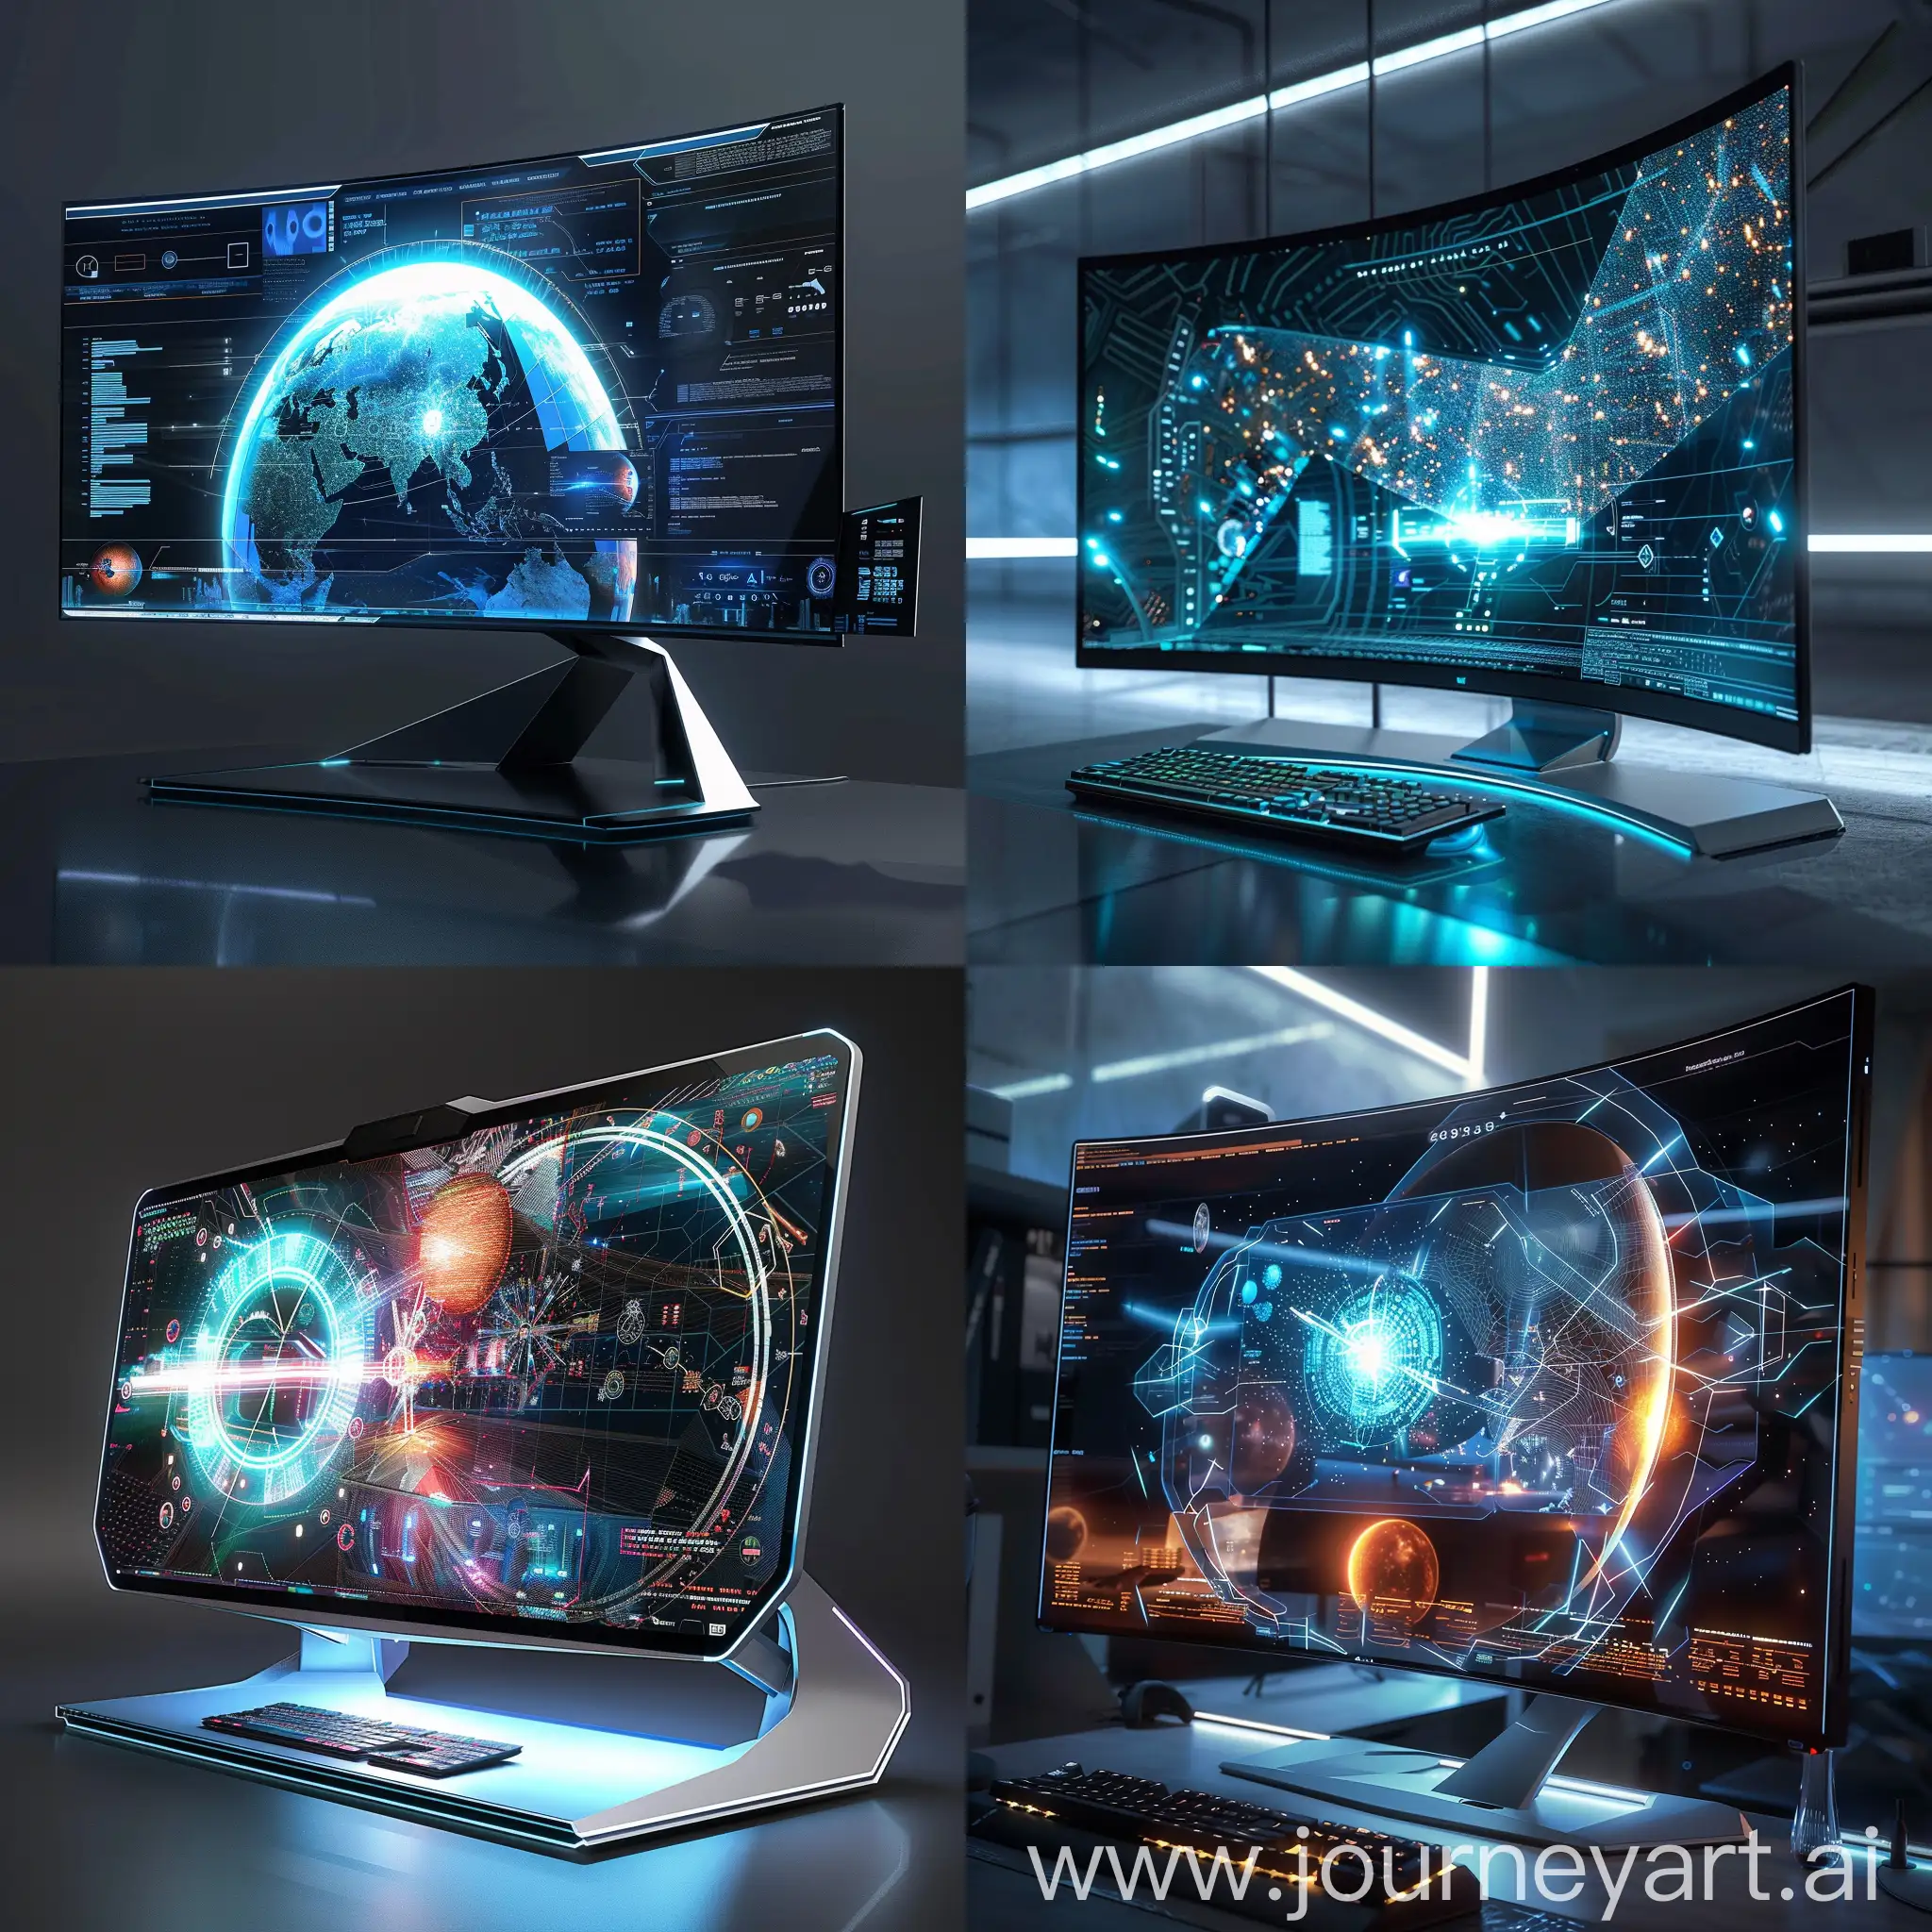 Futuristic-SciFi-PC-Monitor-with-Quantum-Dot-Display-and-Holographic-Projection